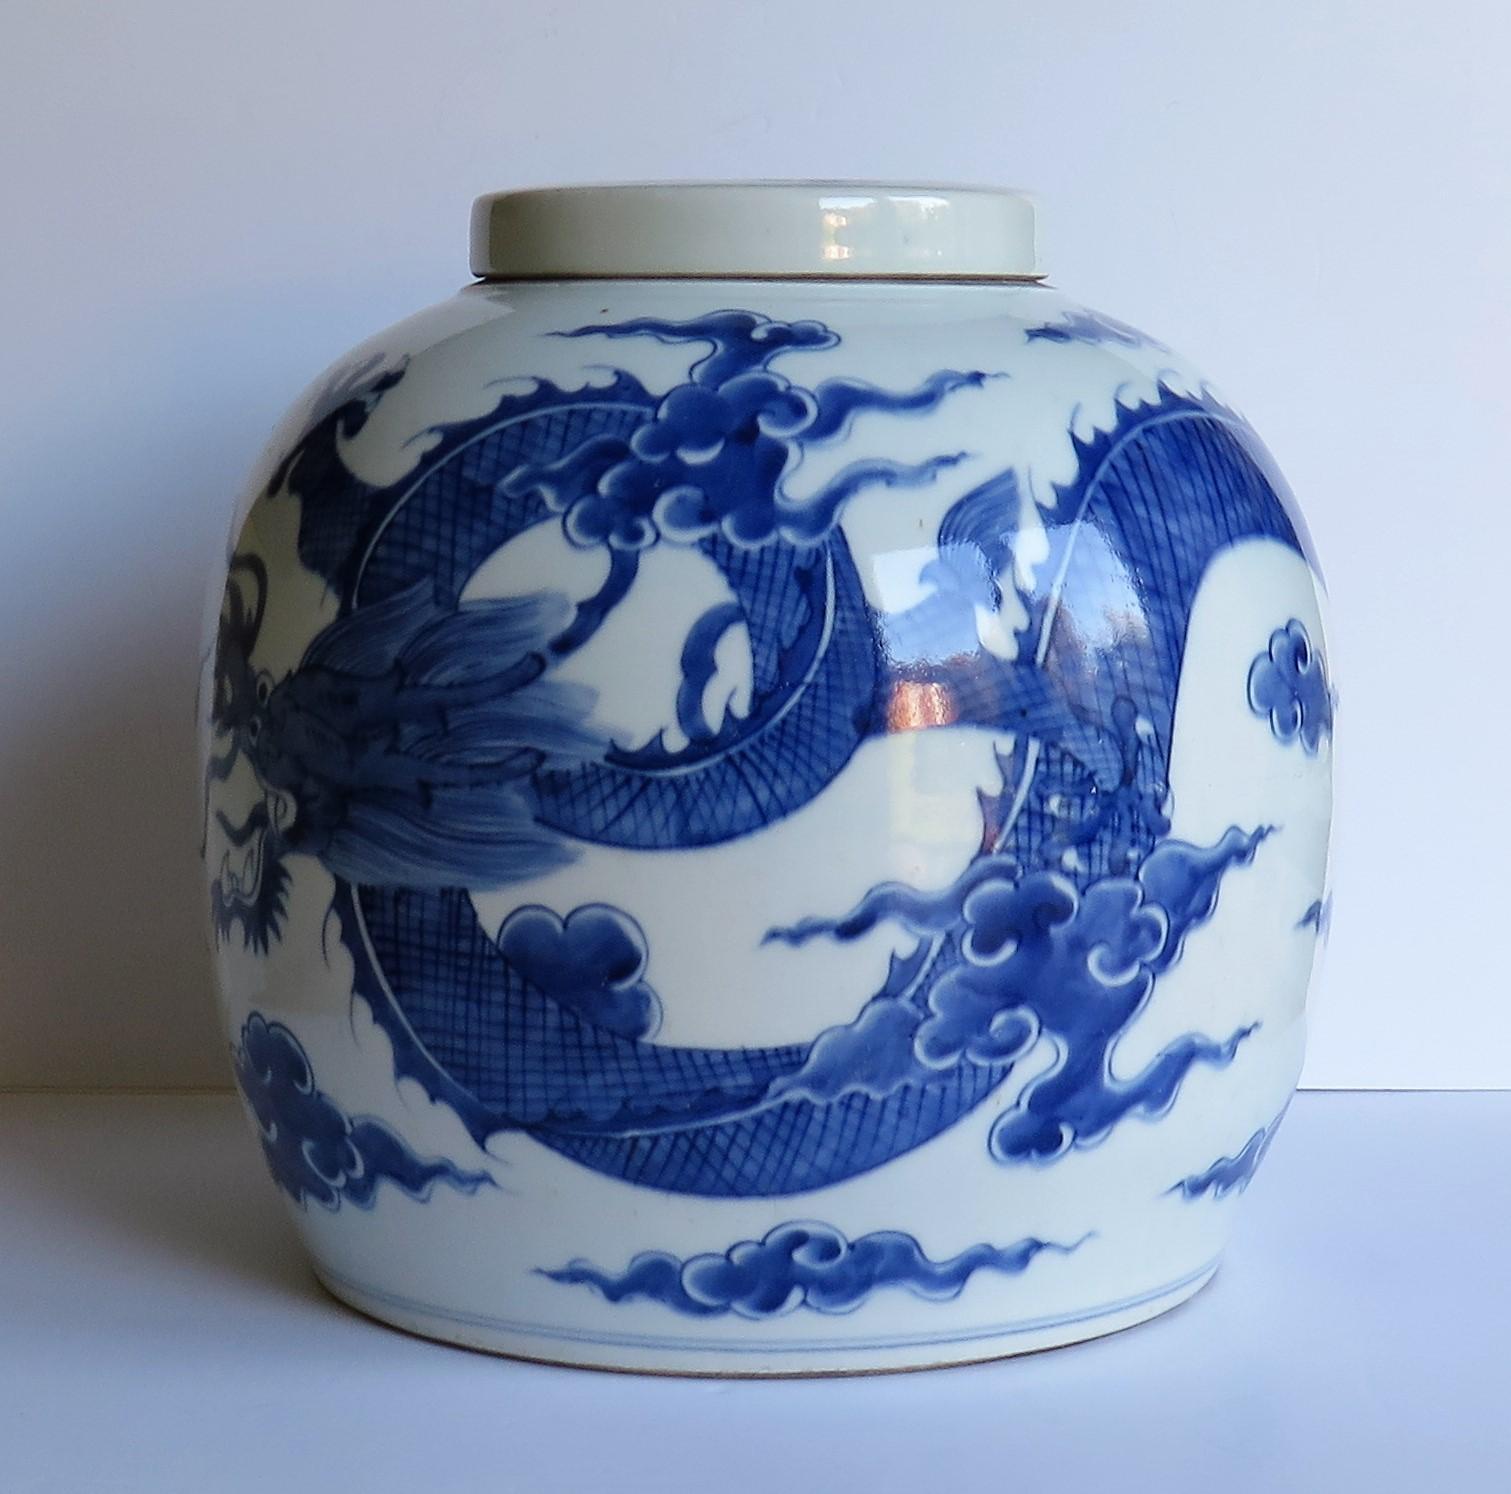 This is a very large Chinese porcelain blue and white lidded or covered jar with a hand painted imperial dragon and double circle mark to the base. This jar is Chinese export in the earlier Kangxi period style.

The jar is hand potted and comes